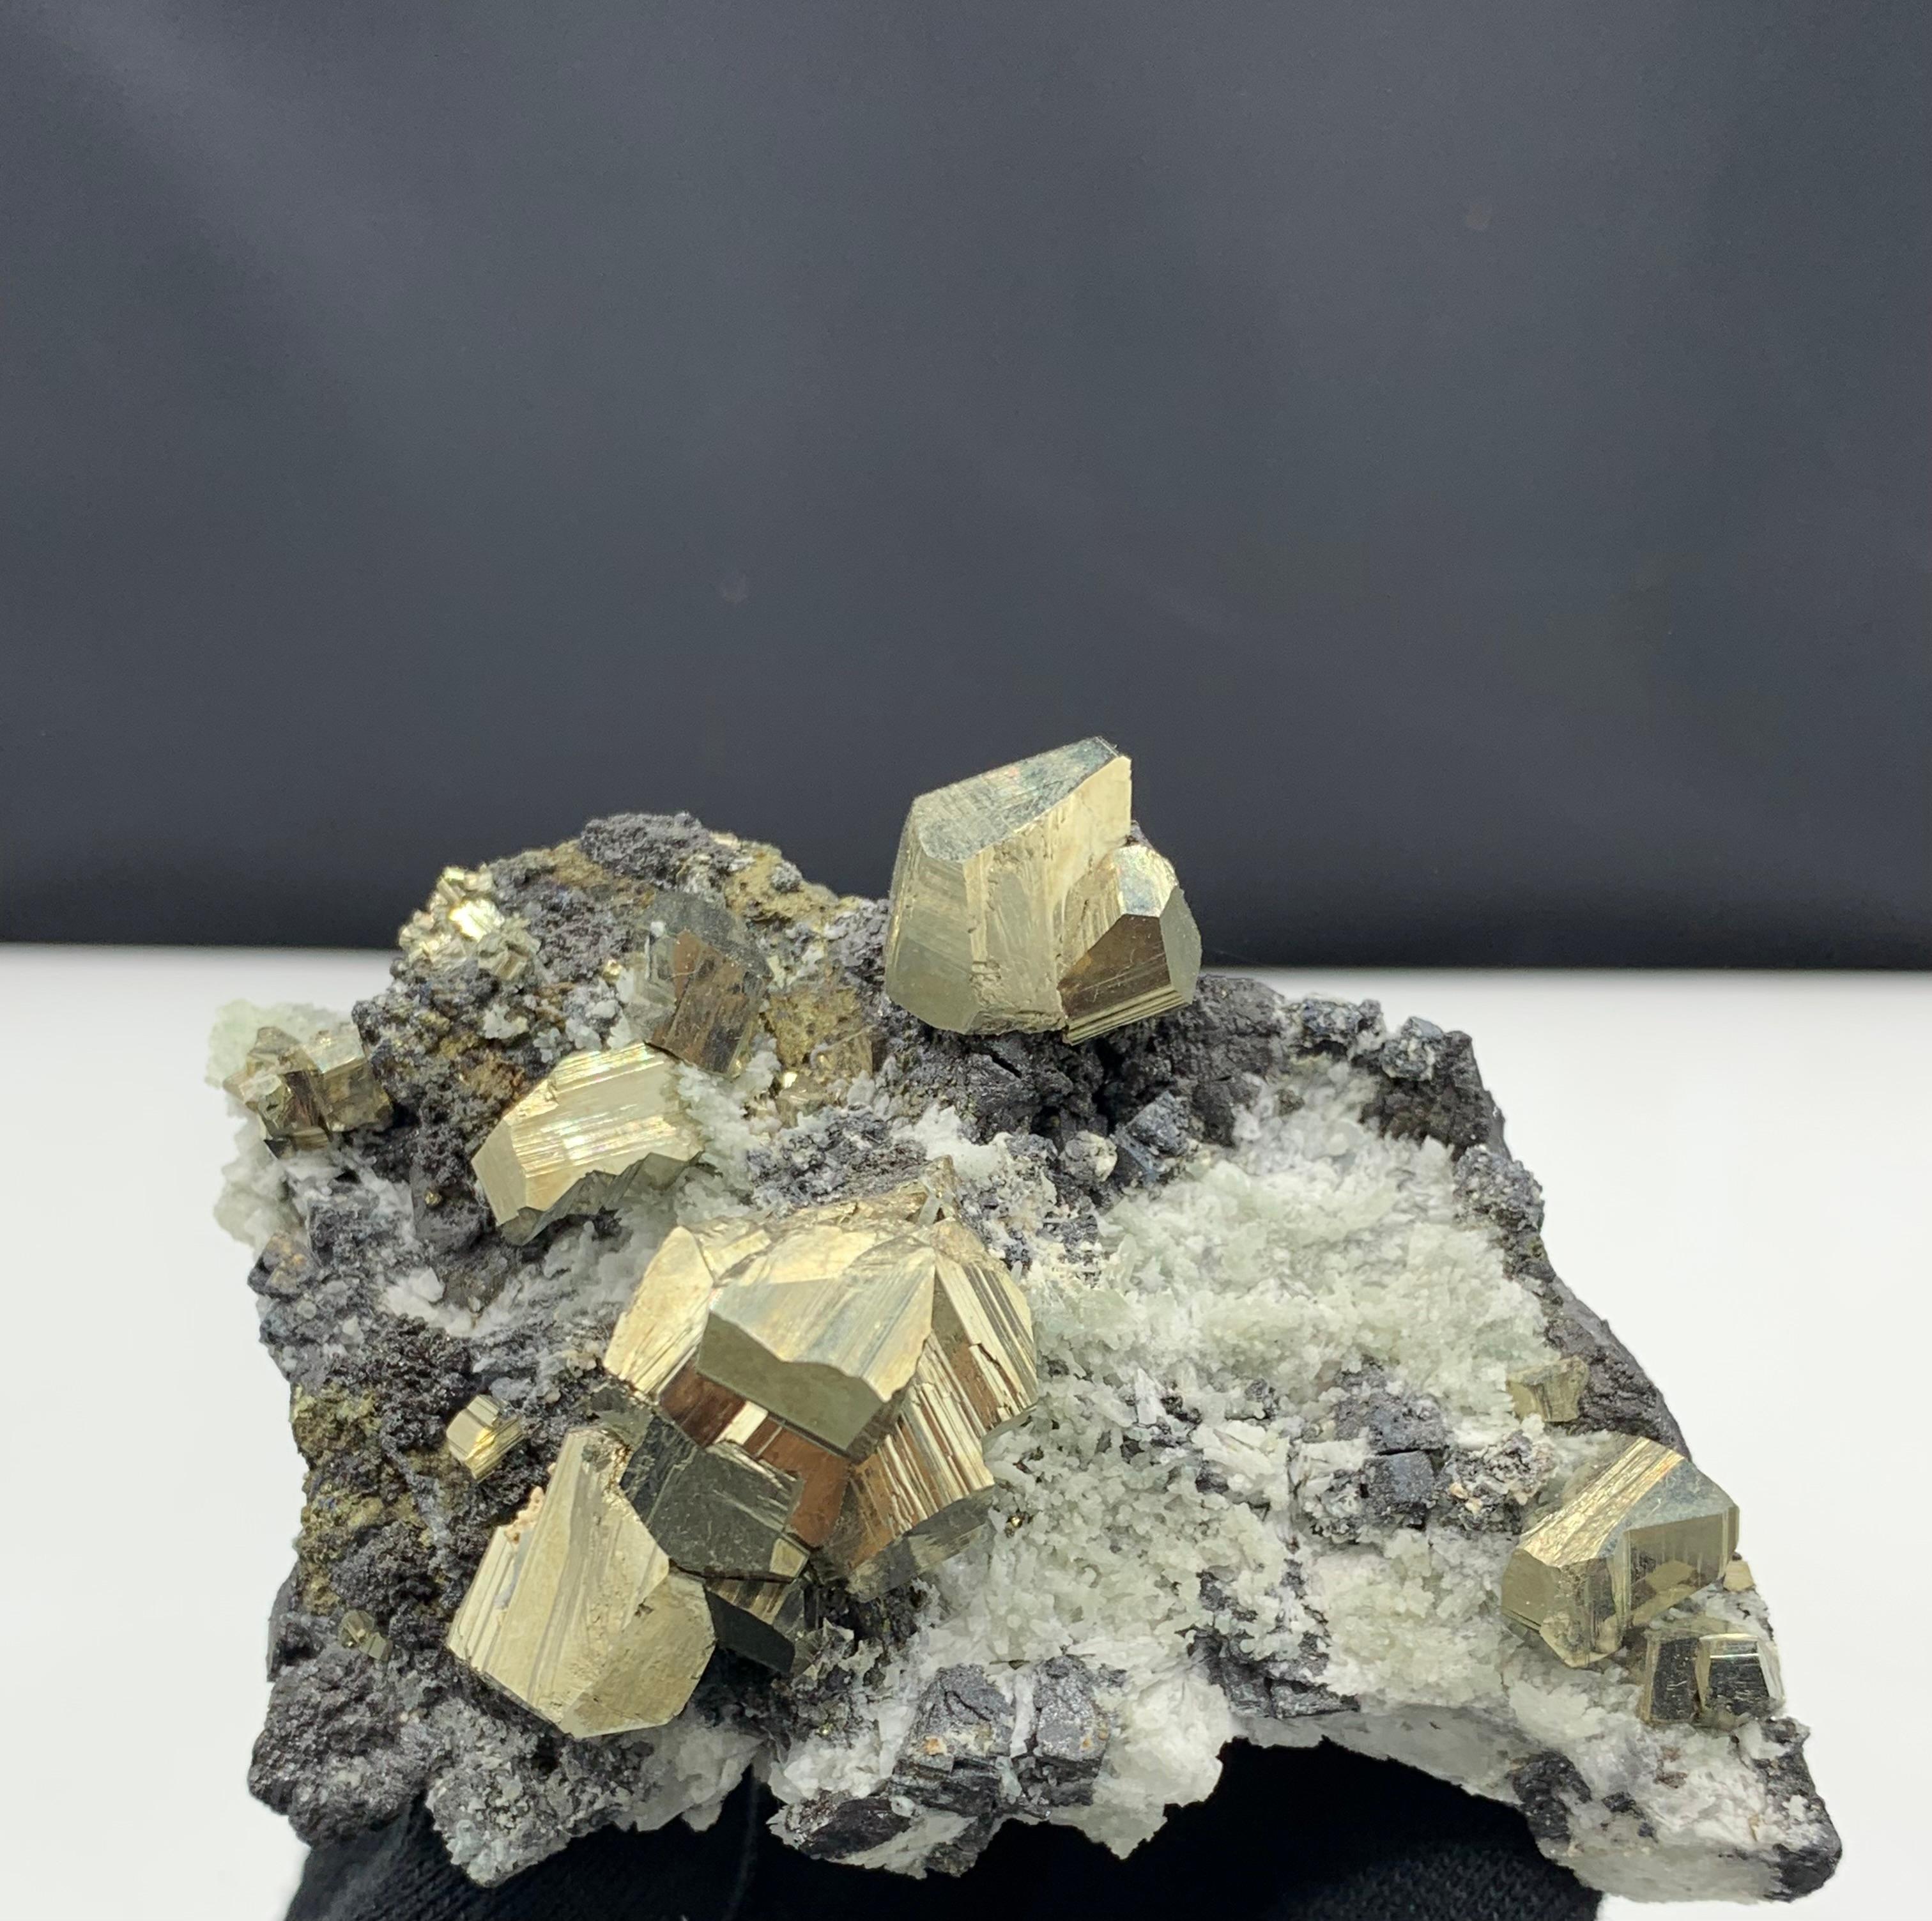 286.37 Gram Glamorous Pyrite Specimen From Pakistan 

Weight: 286.37 Gram
Dimension: 6.5 x 11 x 6.8 Cm
Origin: Pakistan 

Pyrite is found in a wide variety of geological settings, from igneous, sedimentary and metamorphic rock to hydrothermal